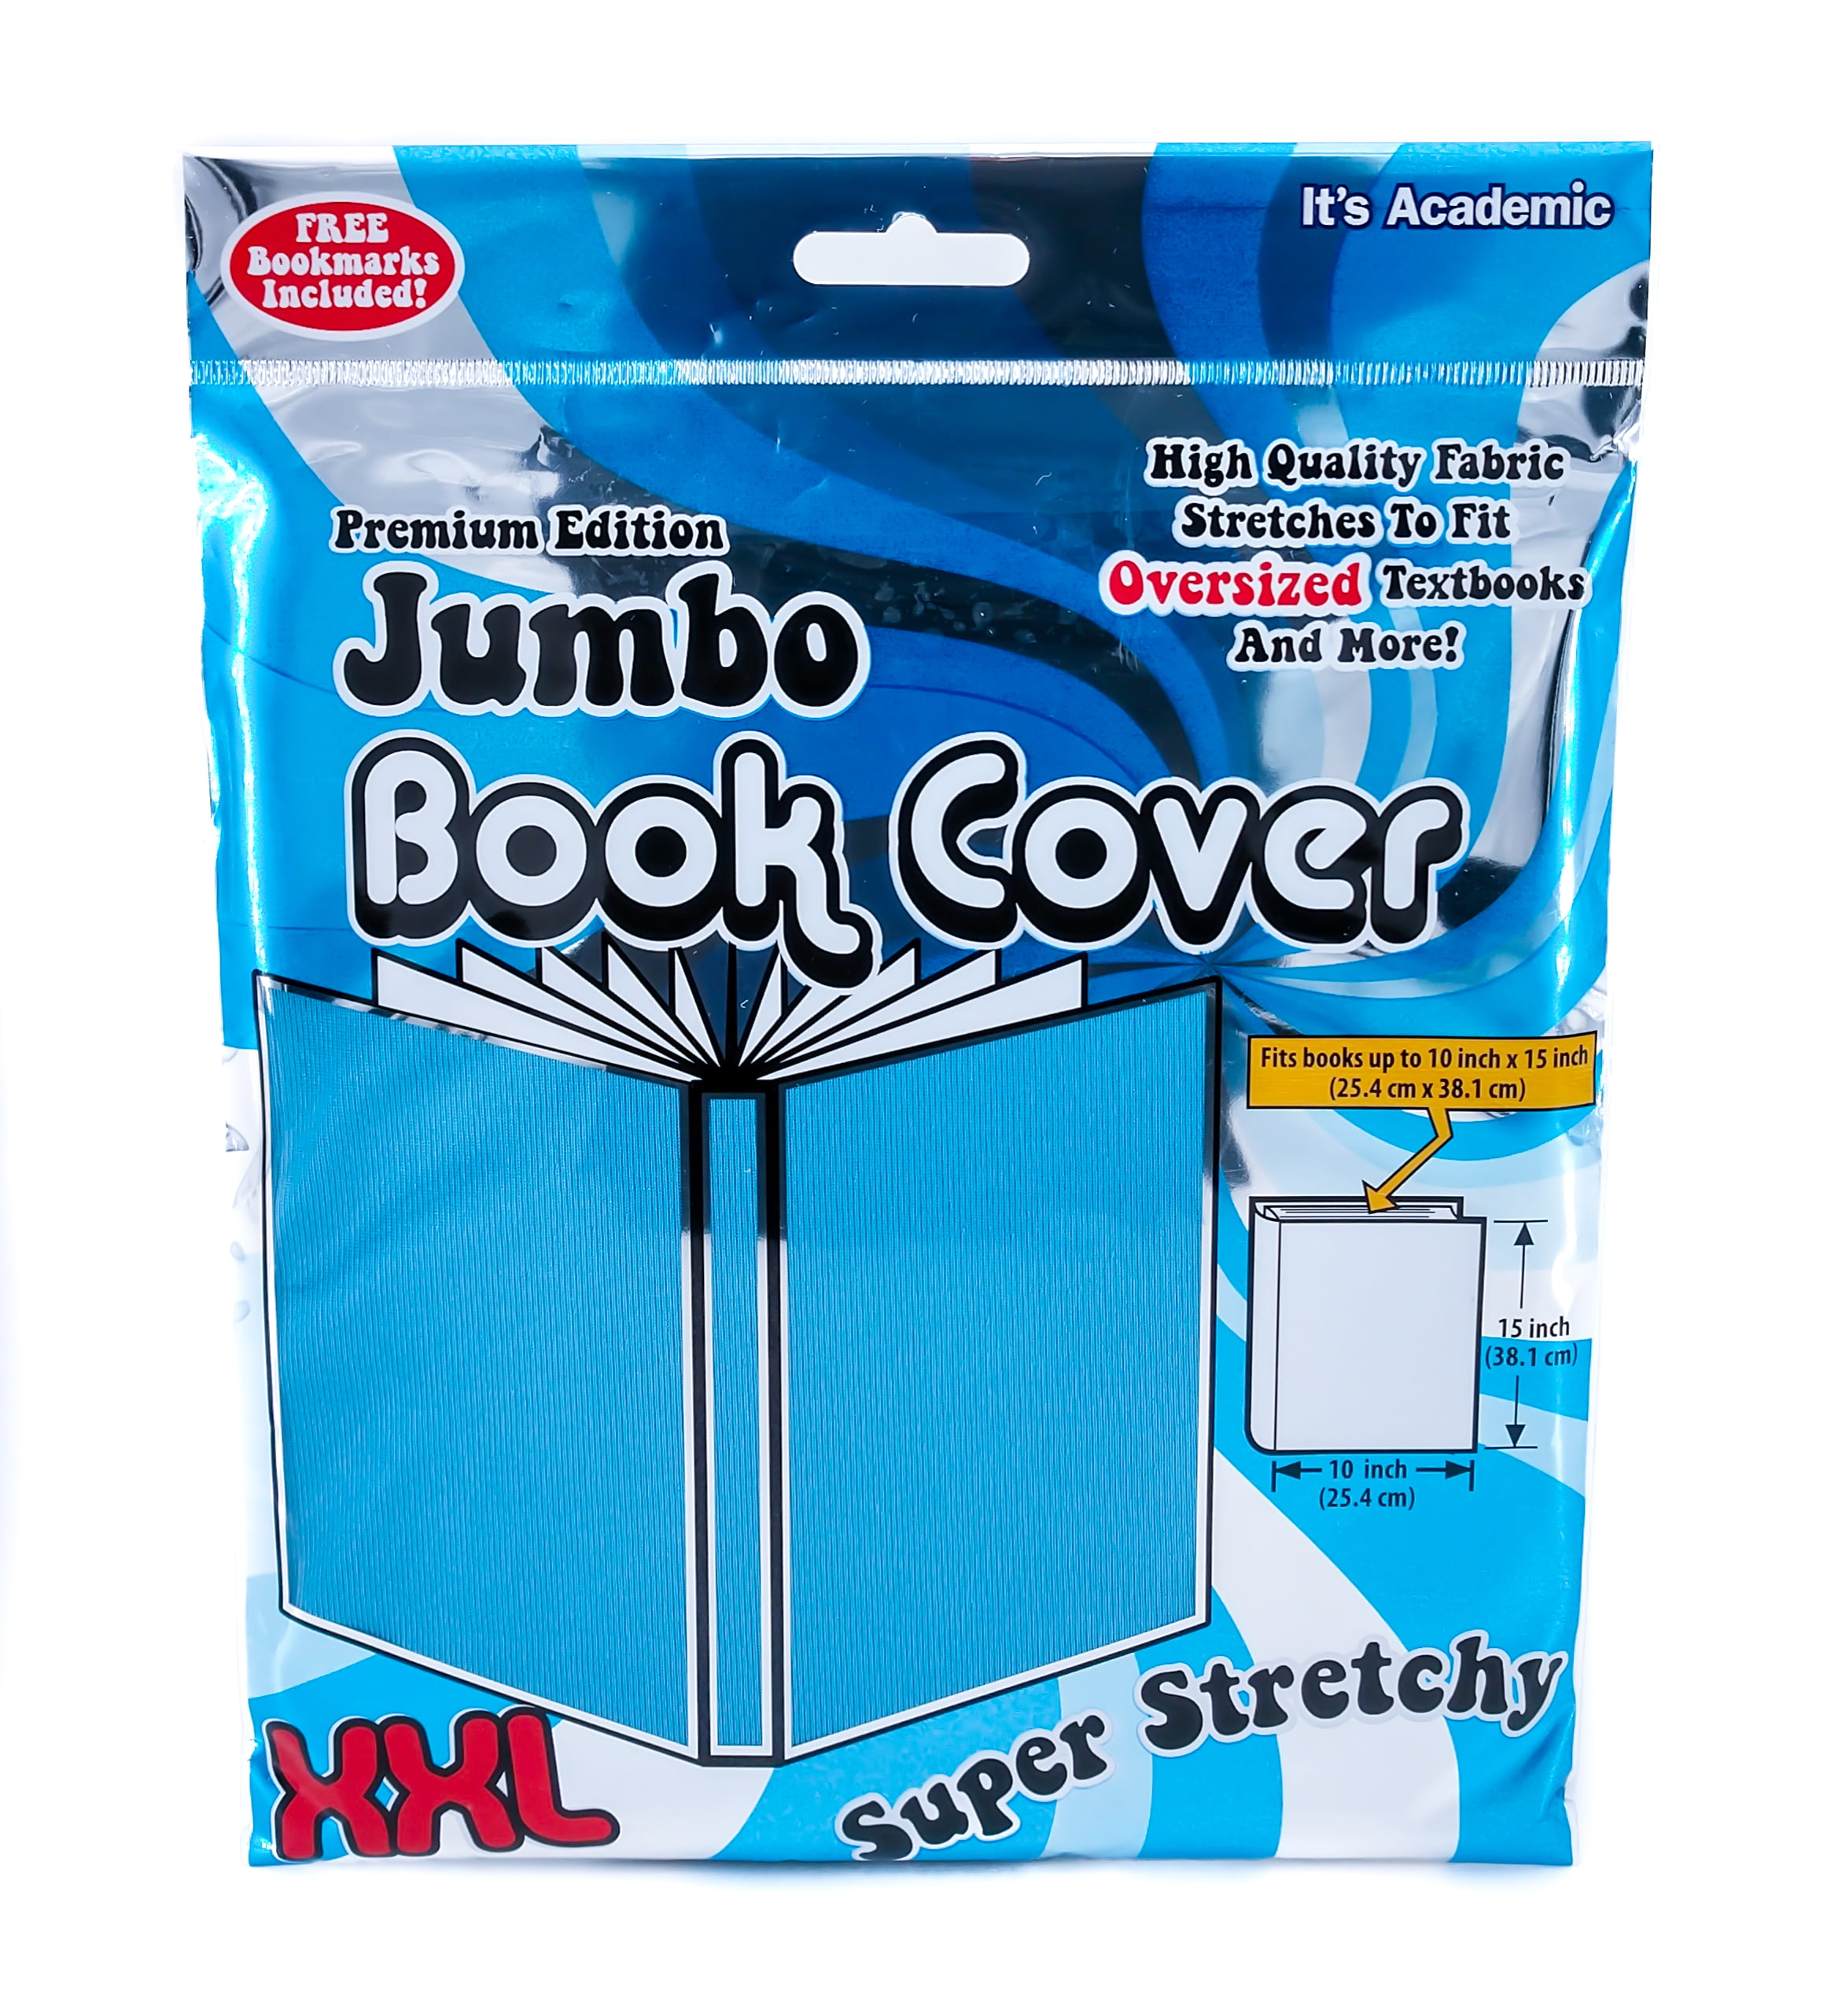 Jumbo Book Cover Over Sized Textbook XXL Super Stretchy Fabric Fits 10" x 15" 